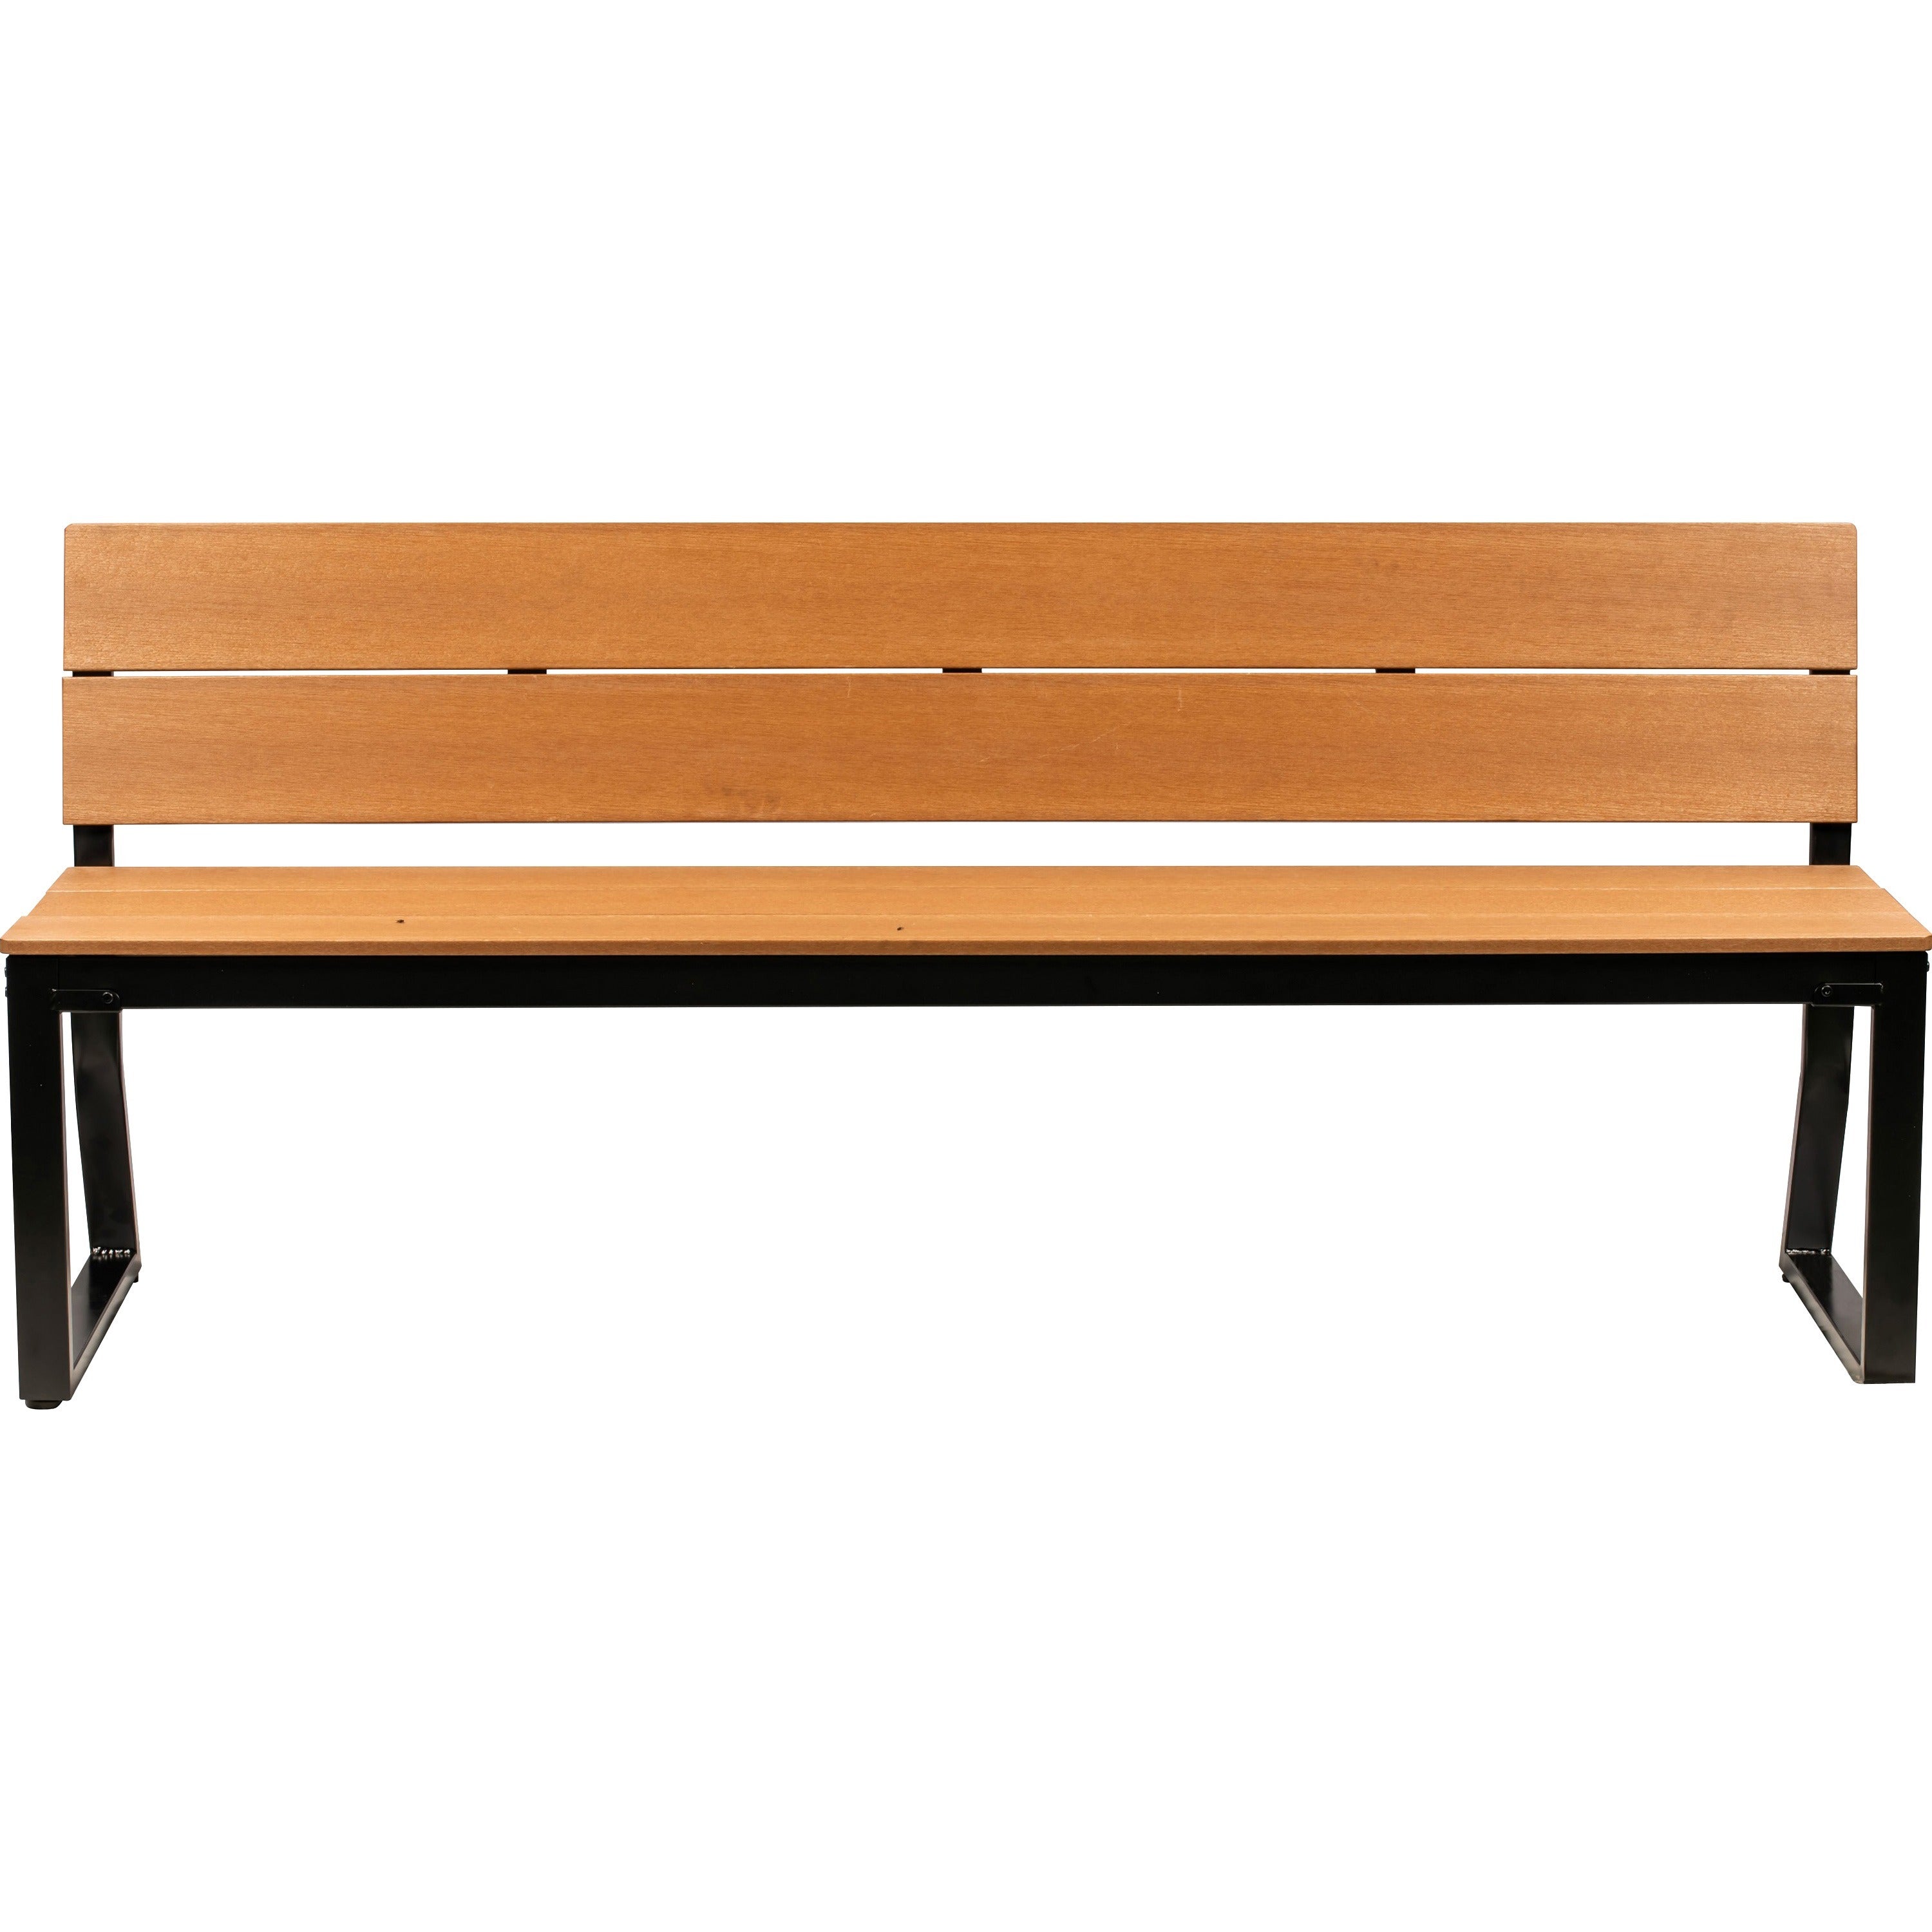 lorell-faux-wood-outdoor-bench-with-backrest-teak-faux-wood-seat-teak-faux-wood-back-1-each_llr42690 - 2